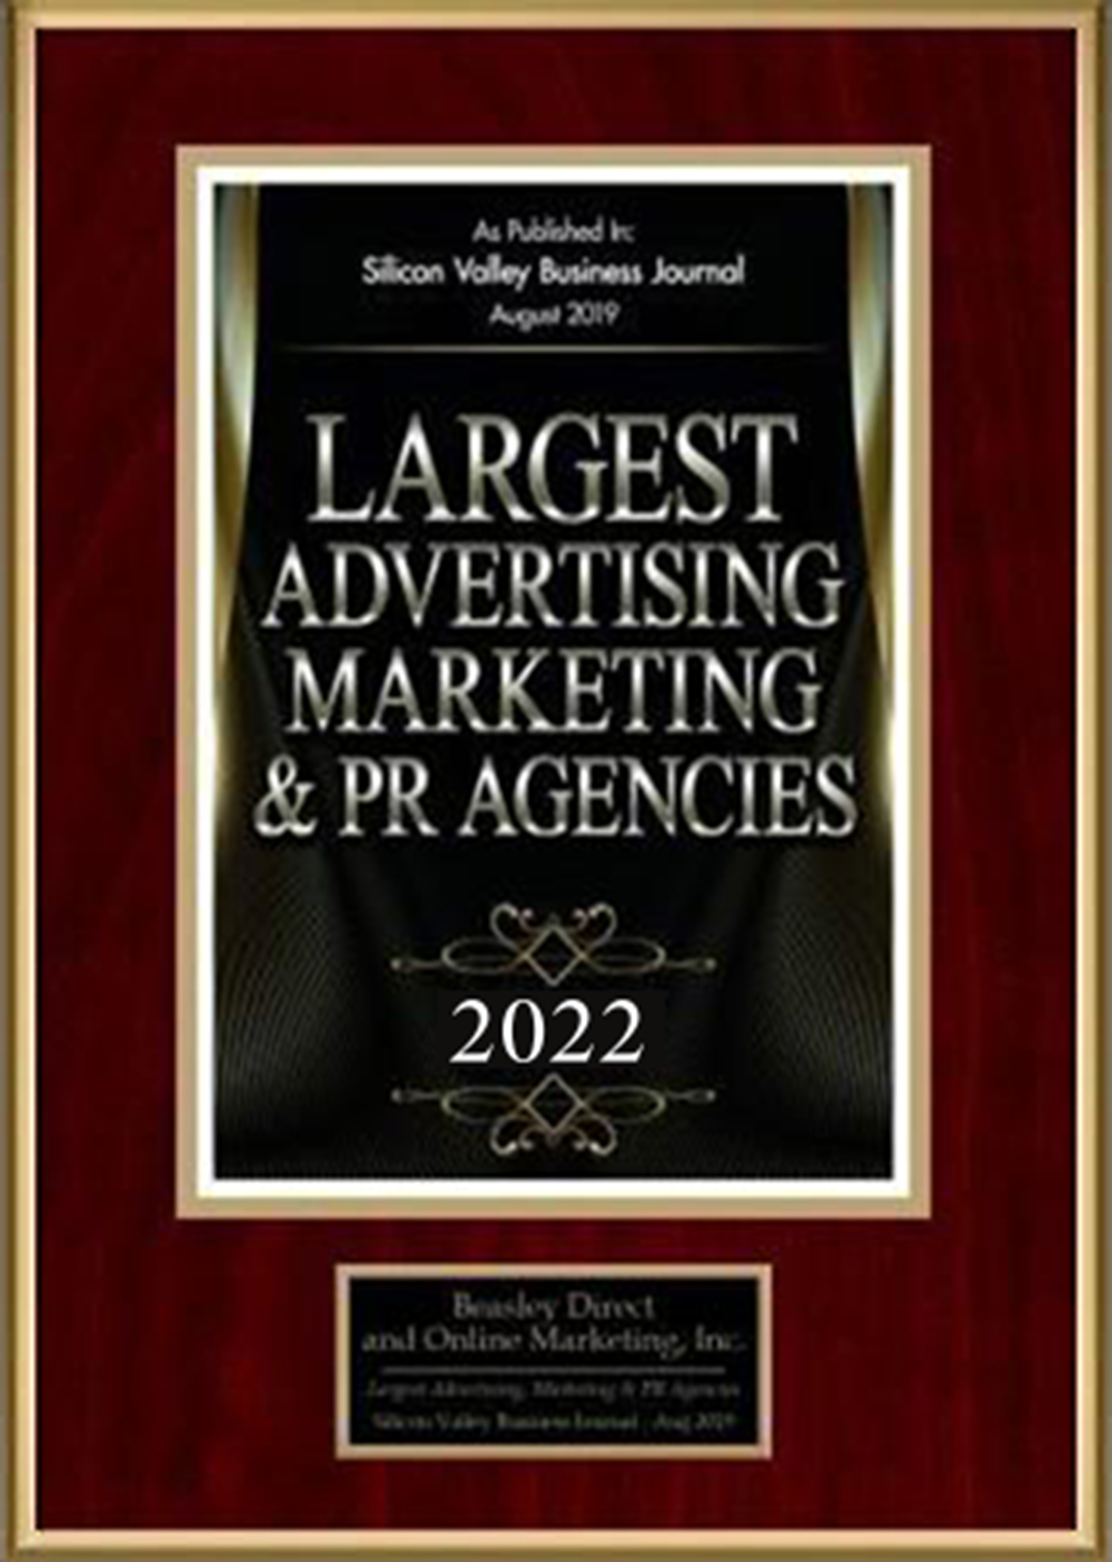 Beasley Direct and Online Marketing, Inc., Places 17th in Silicon Valley Business Journal 2022 List of Largest Advertising, Marketing and PR Agencies